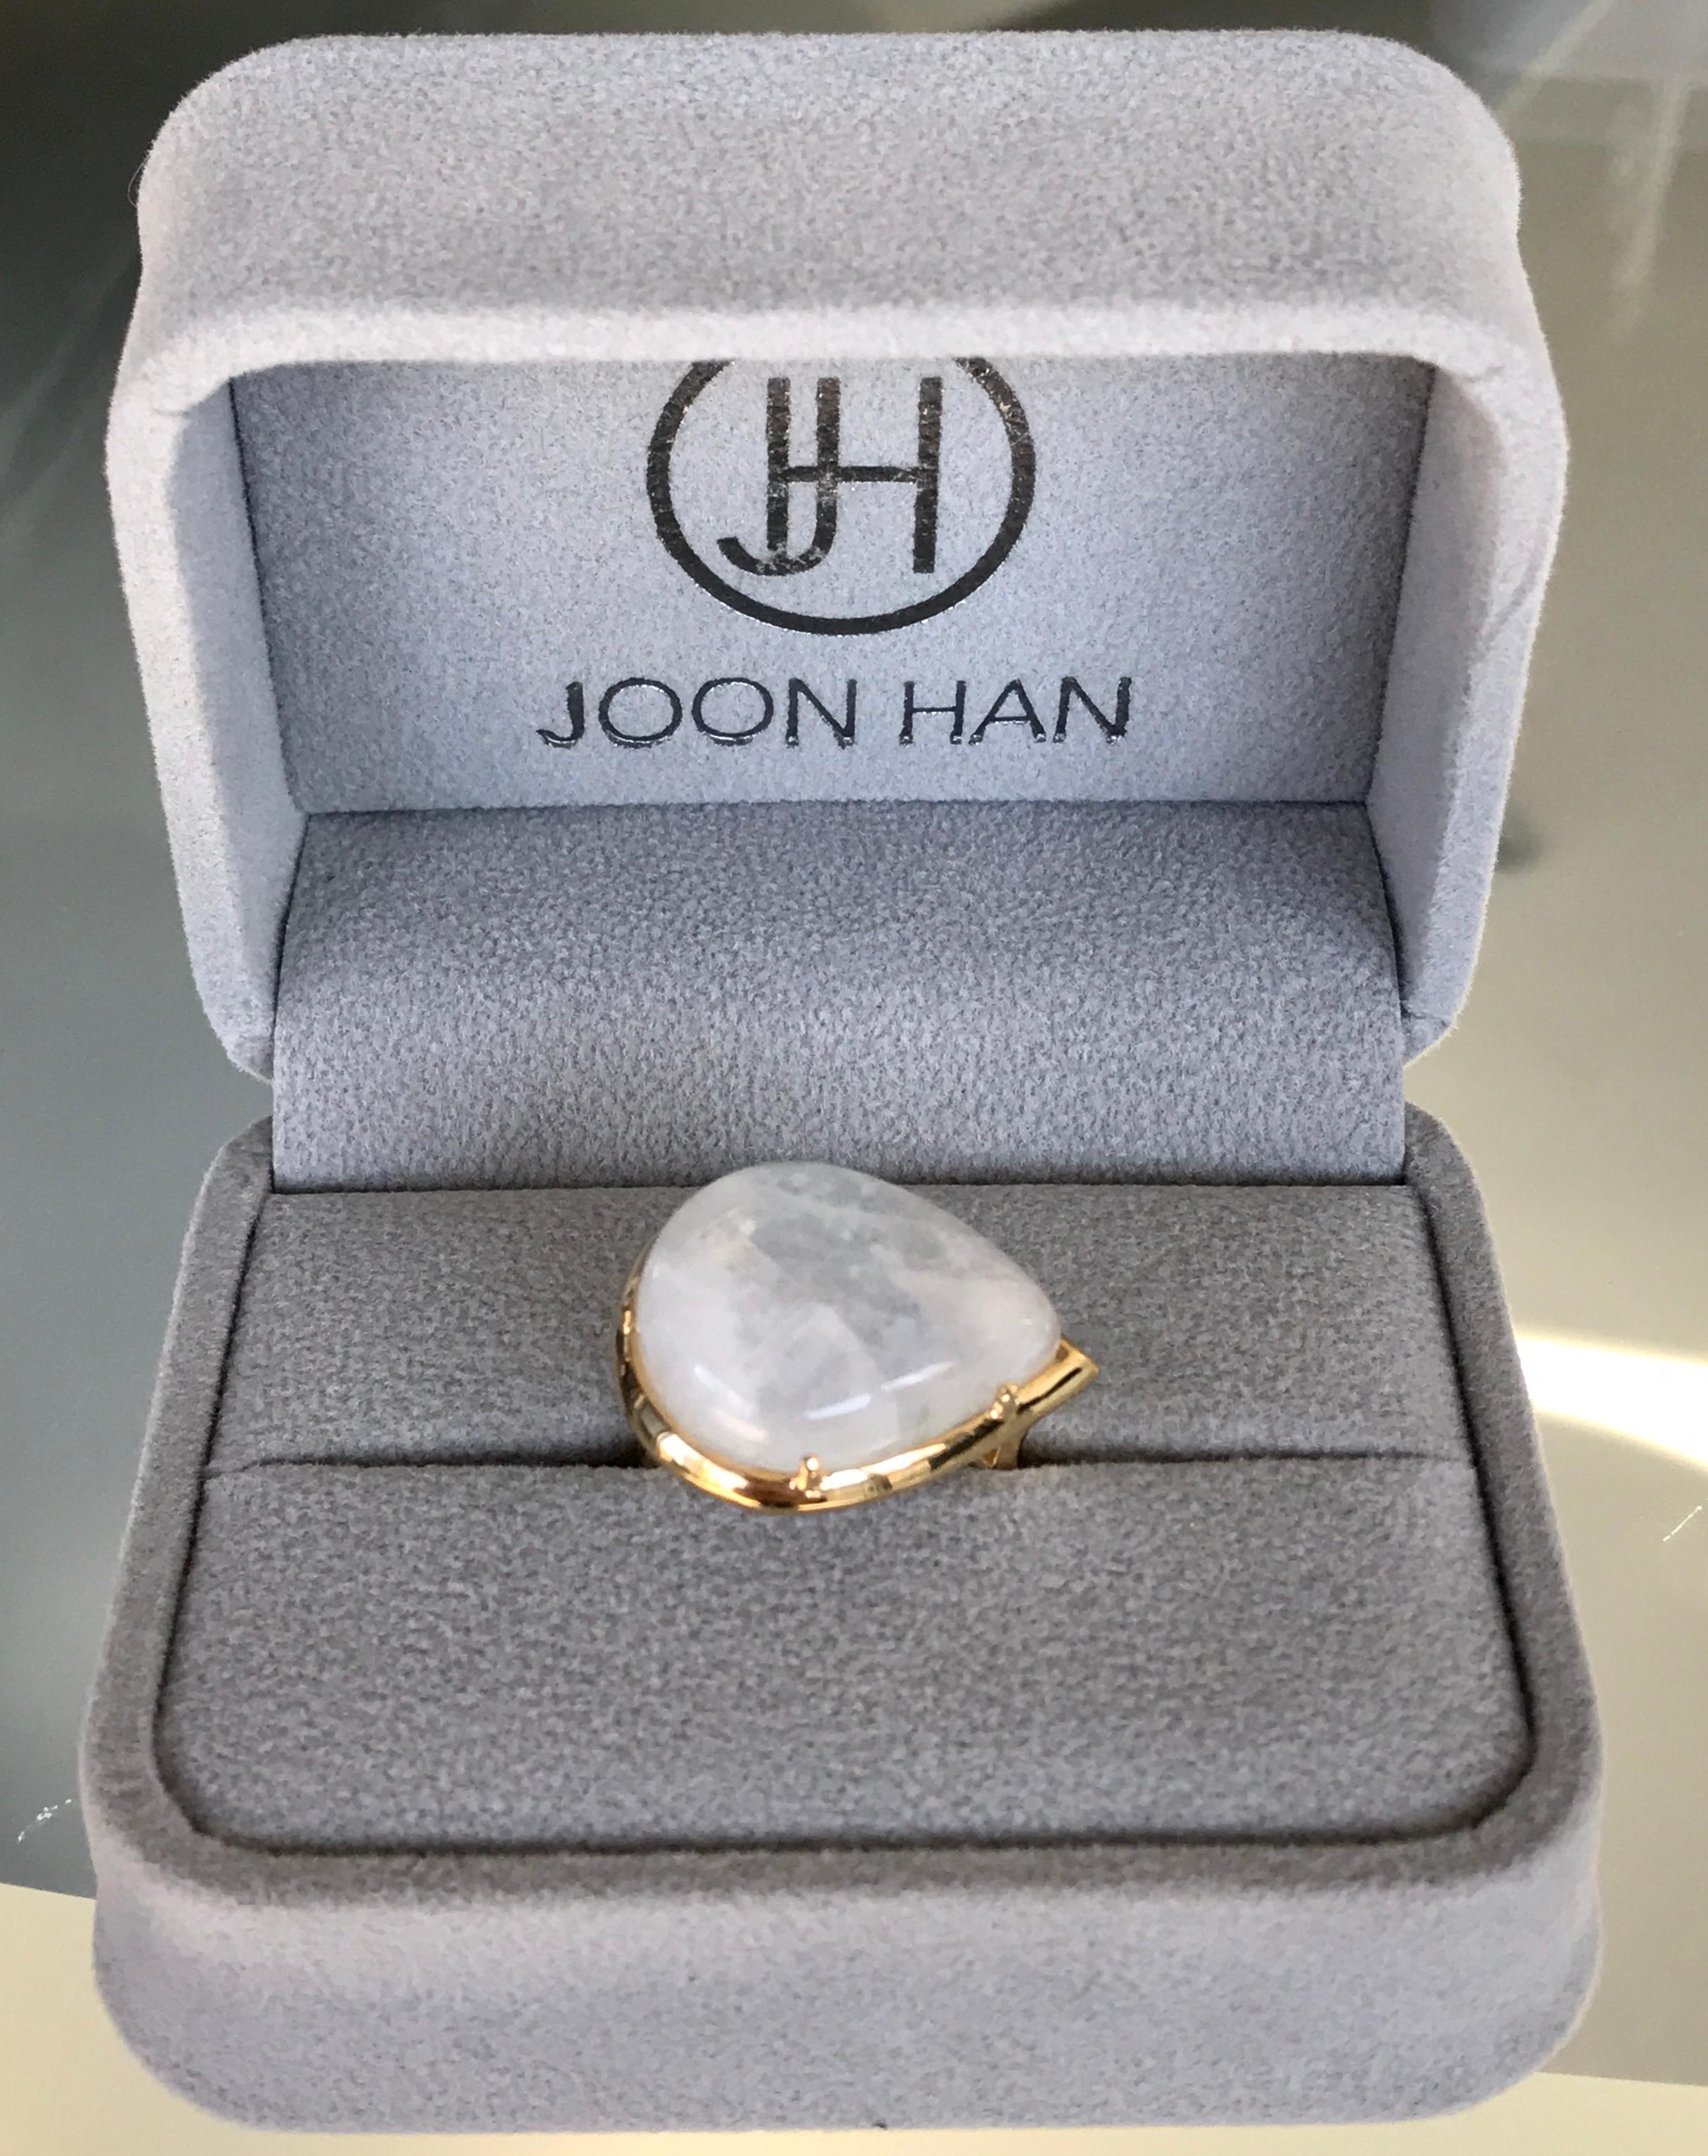 Joon Han Rainbow Moonstone Fancy Cabochon Pear Shape 18K Gold Cocktail Ring For Sale 4